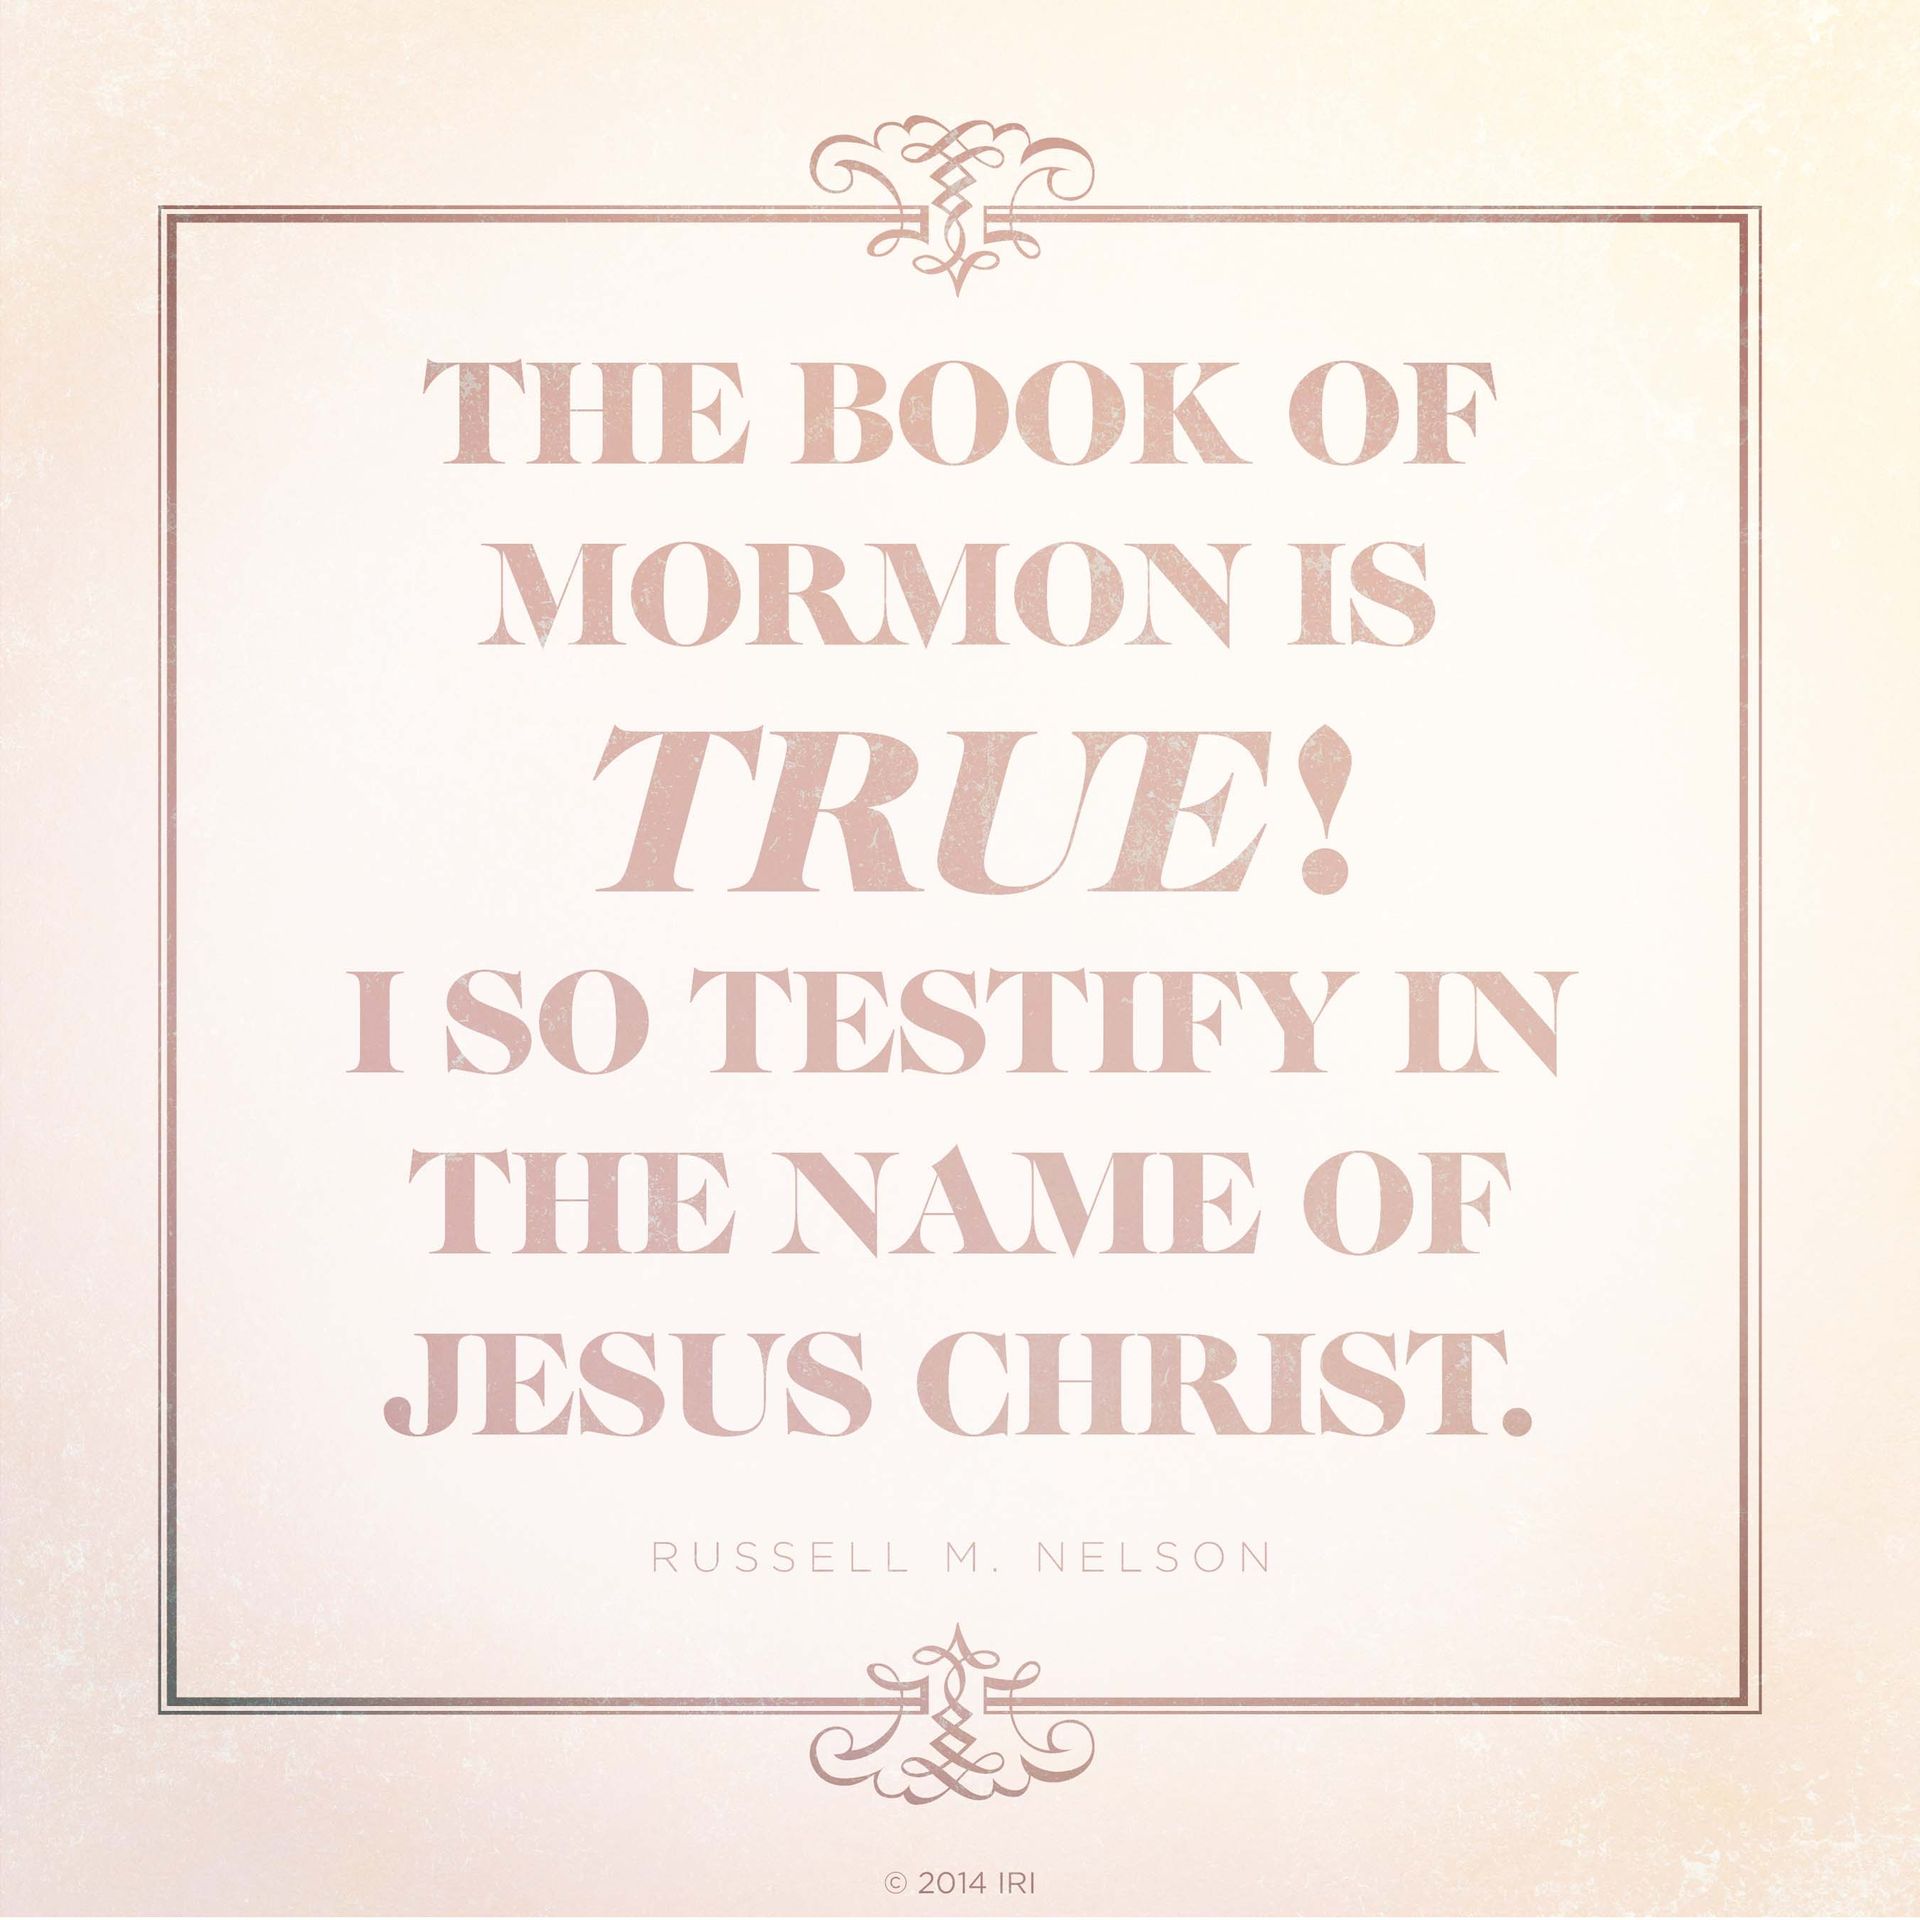 “The Book of Mormon is true! I so testify in the name of Jesus Christ.”—President Russell M. Nelson, “A Testimony of the Book of Mormon”